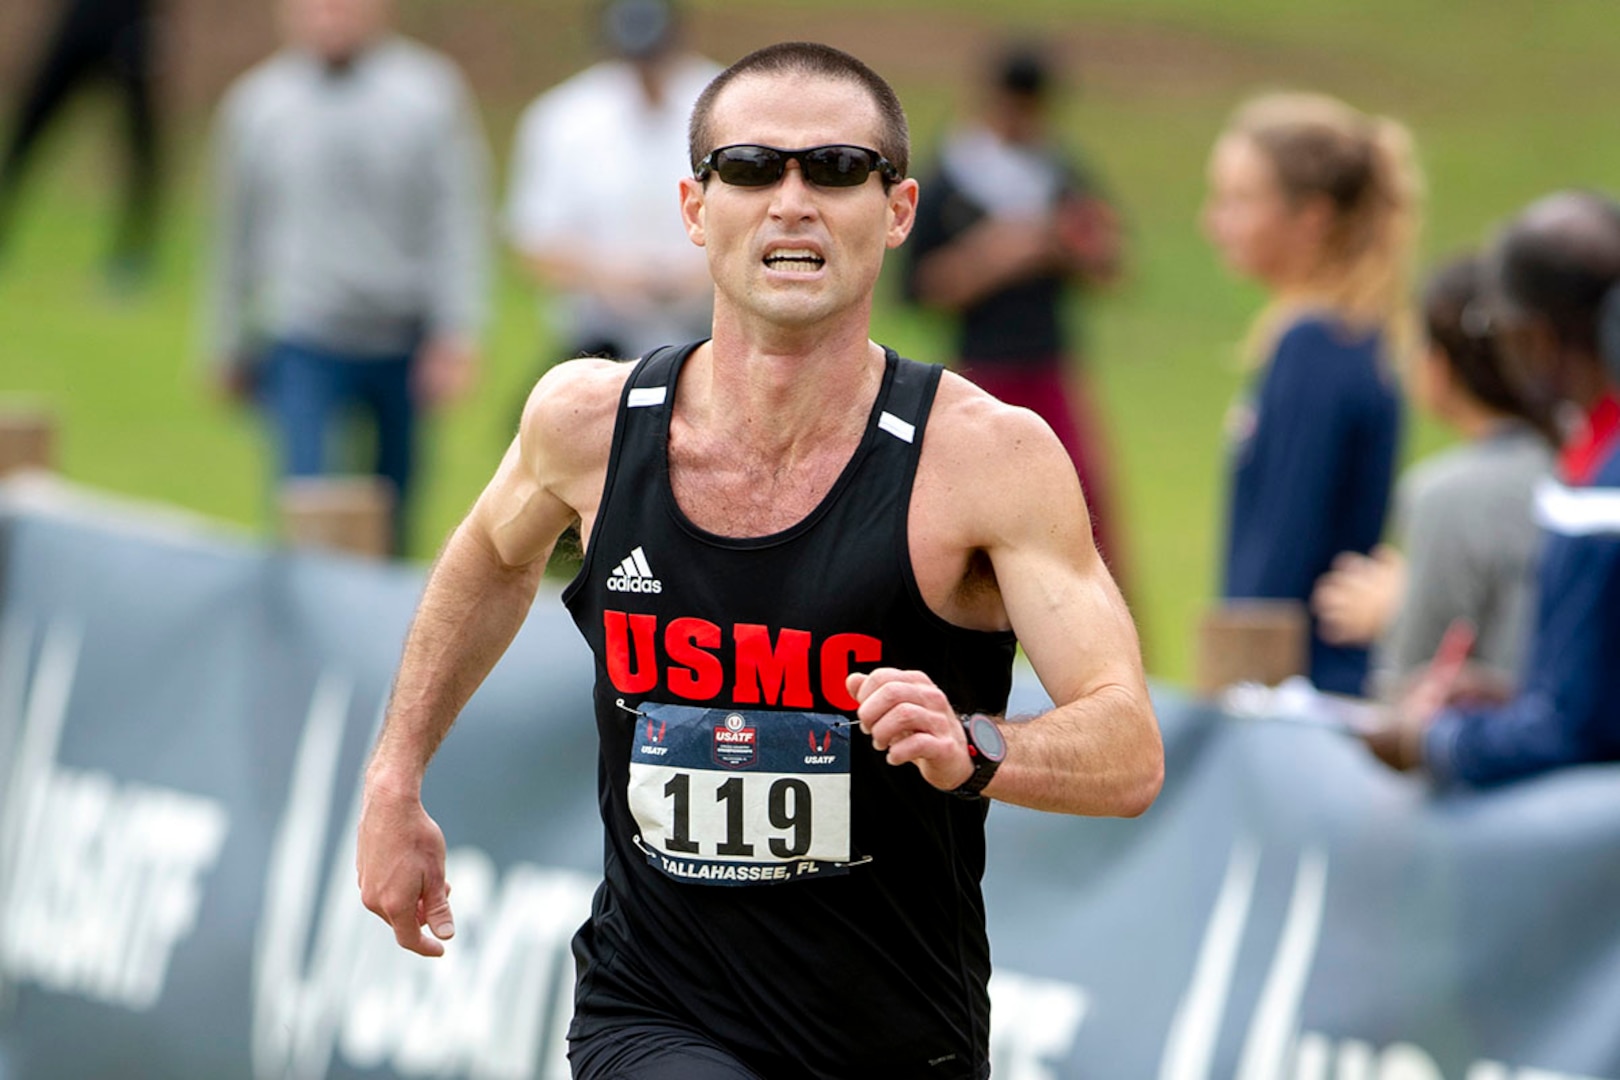 Marine Corps Sean Barrett competes in the 2019 Armed Forces Cross Country Championship and simultaneously the 2019 USA Track and Field Cross Country Championship.